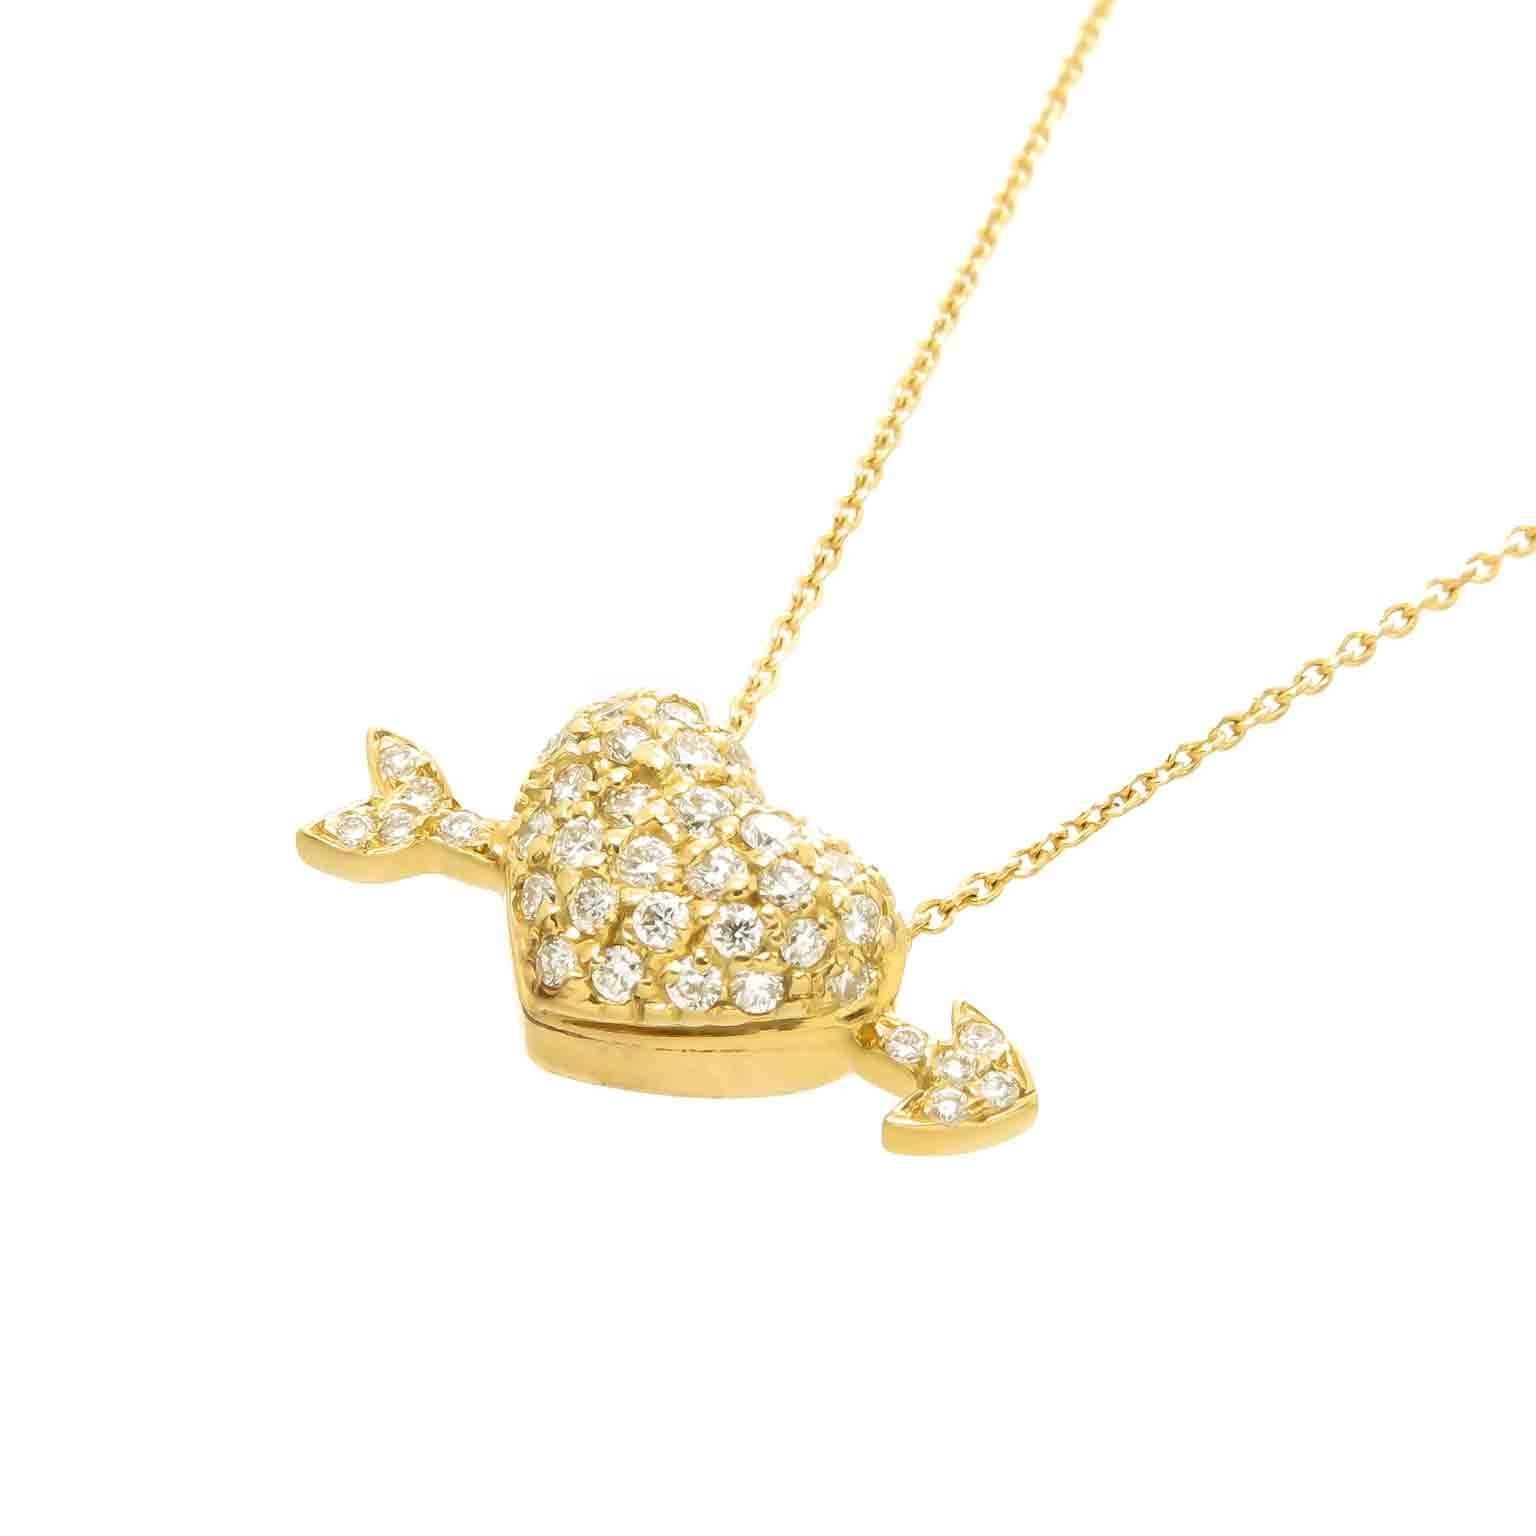 Circa 2012 Roberto Coin 18K yellow Gold Arrow through Heart Pendant, measuring 7/8 inch in length, pave set with Round Brilliant cut Diamonds totaling 1/2 carat. Suspended from a 16 Inch Chain. The last known retail price of this piece new was